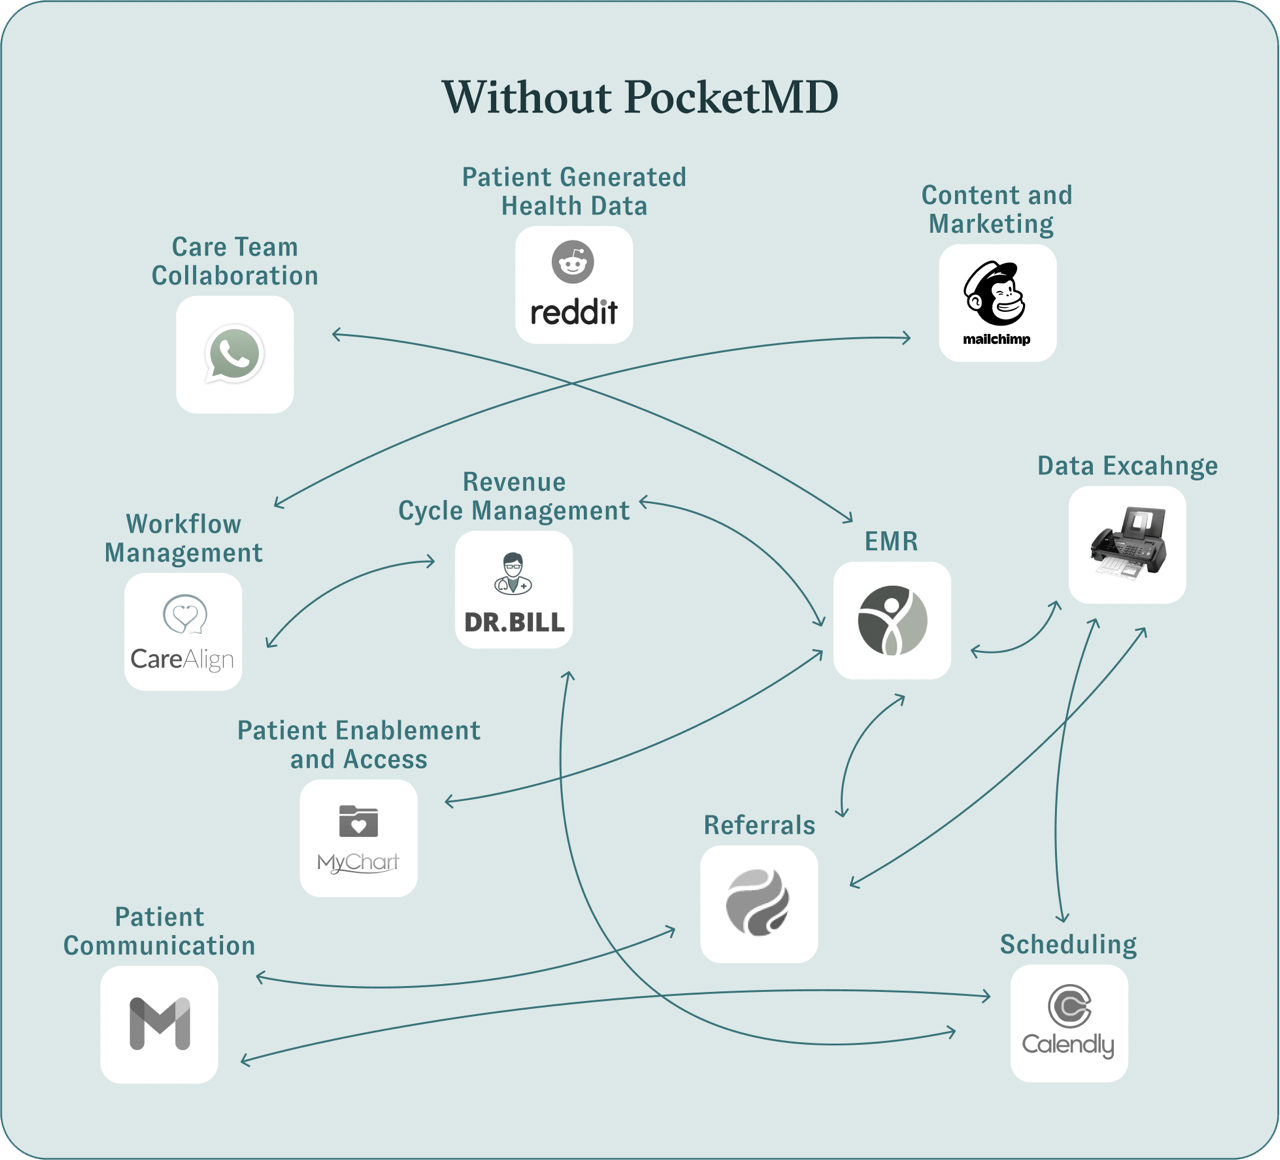 Without PocketMD